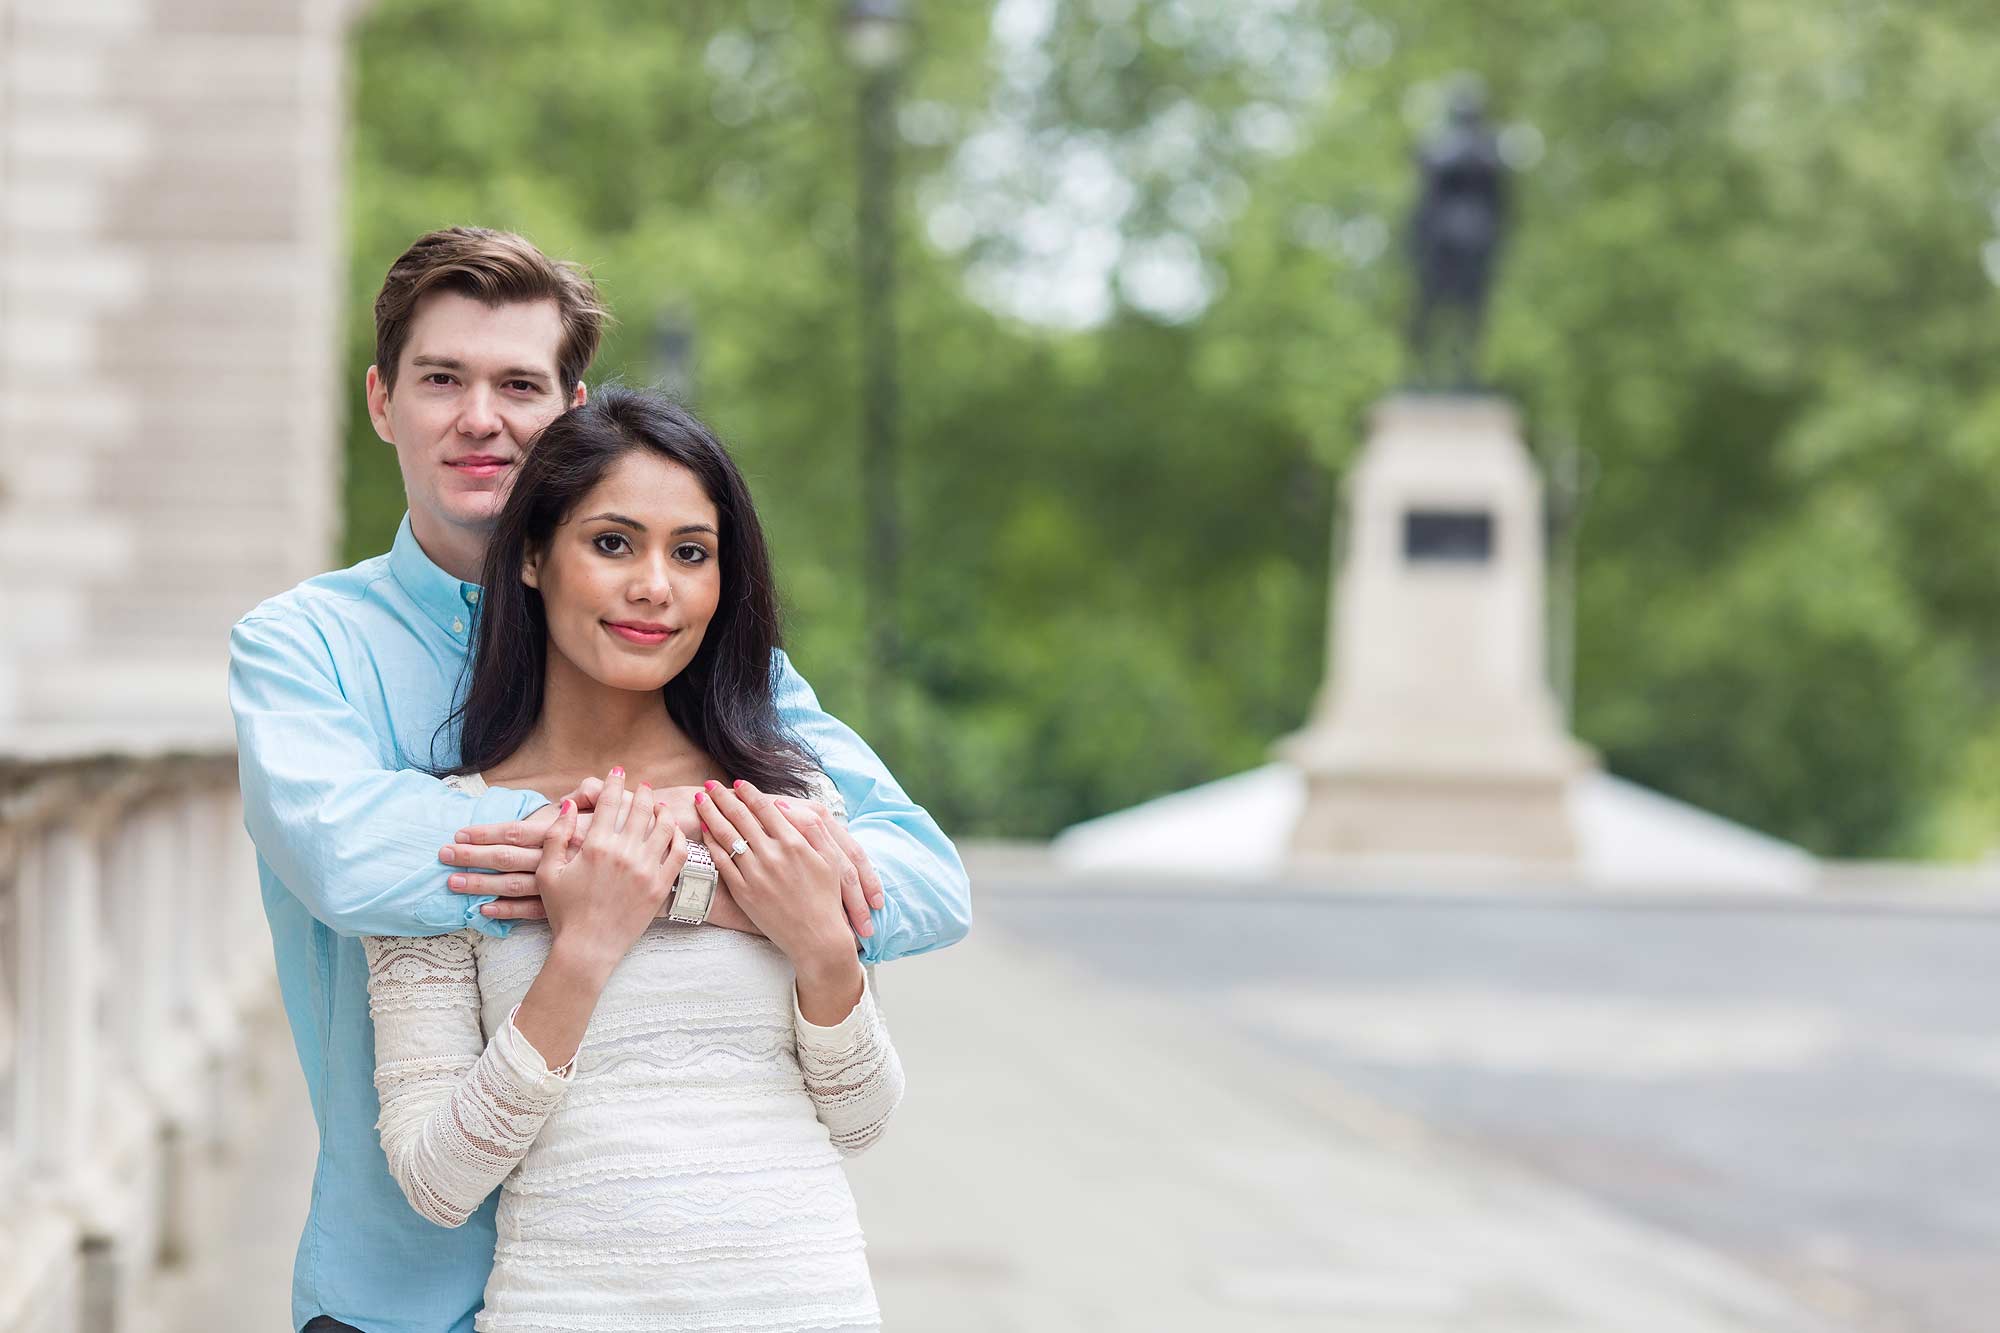 pretty engagement shoot pictures in London